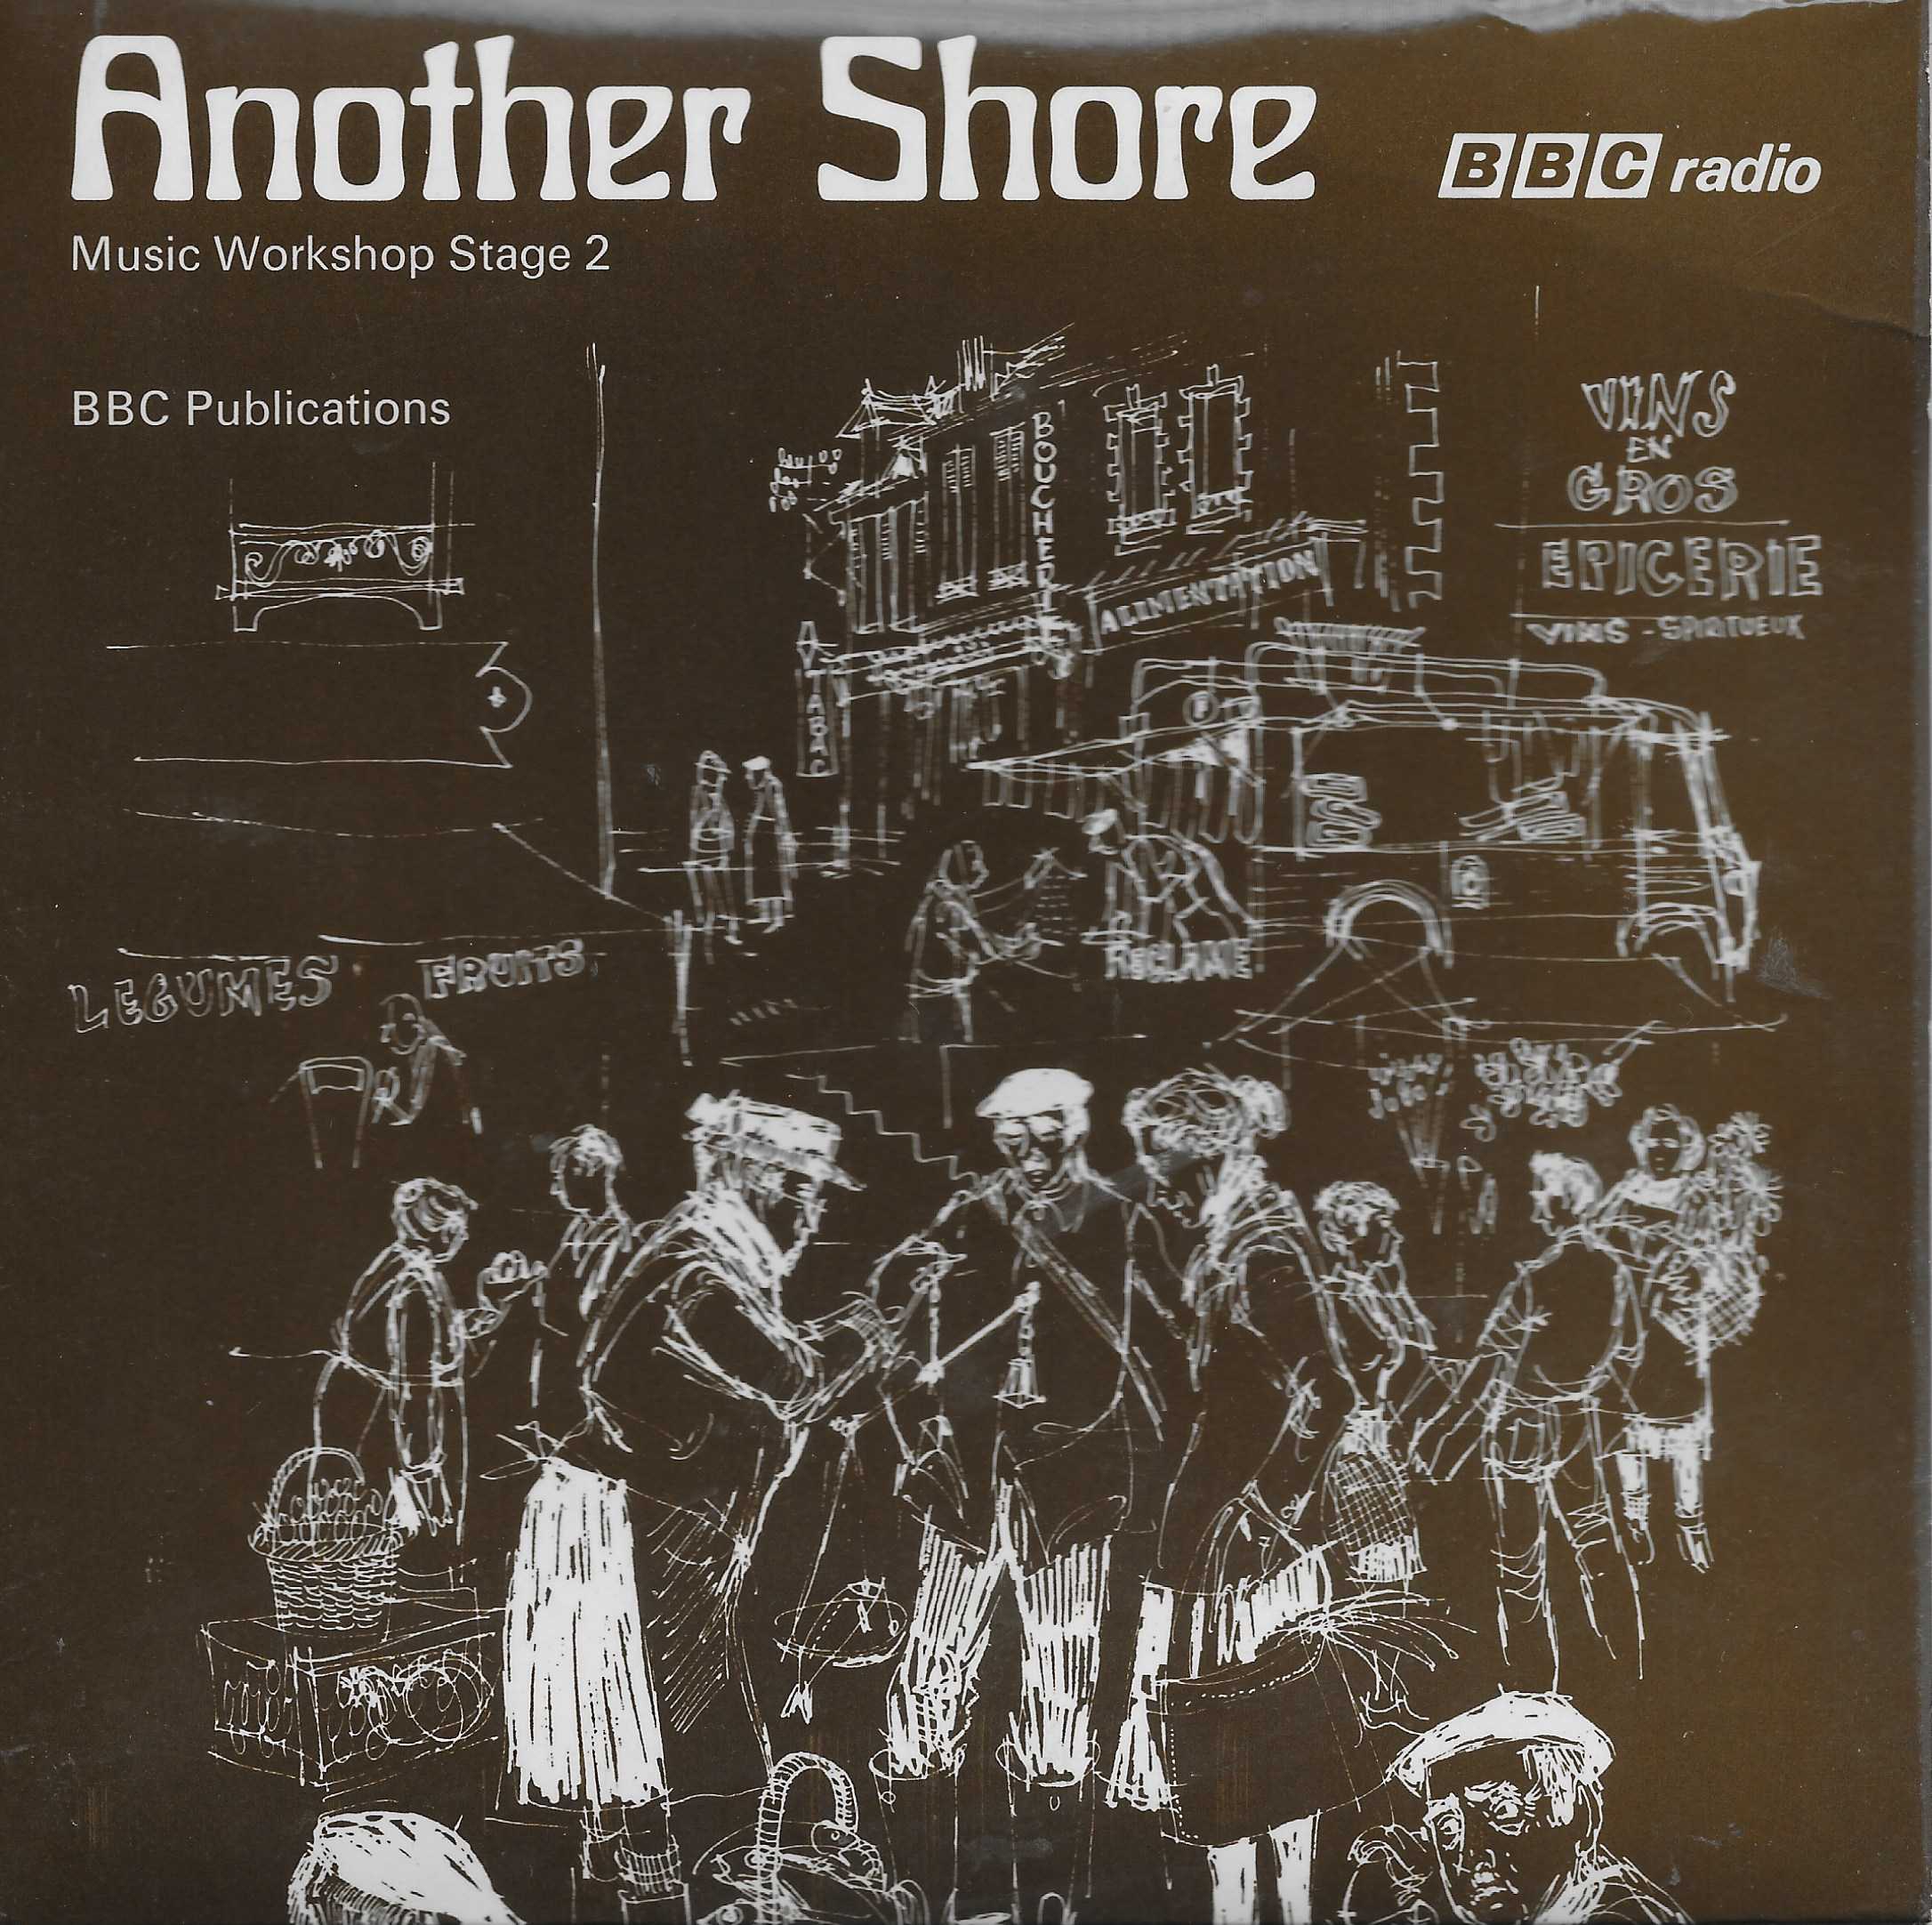 Picture of OP 157/158 Another shore by artist Jan Rosol from the BBC singles - Records and Tapes library